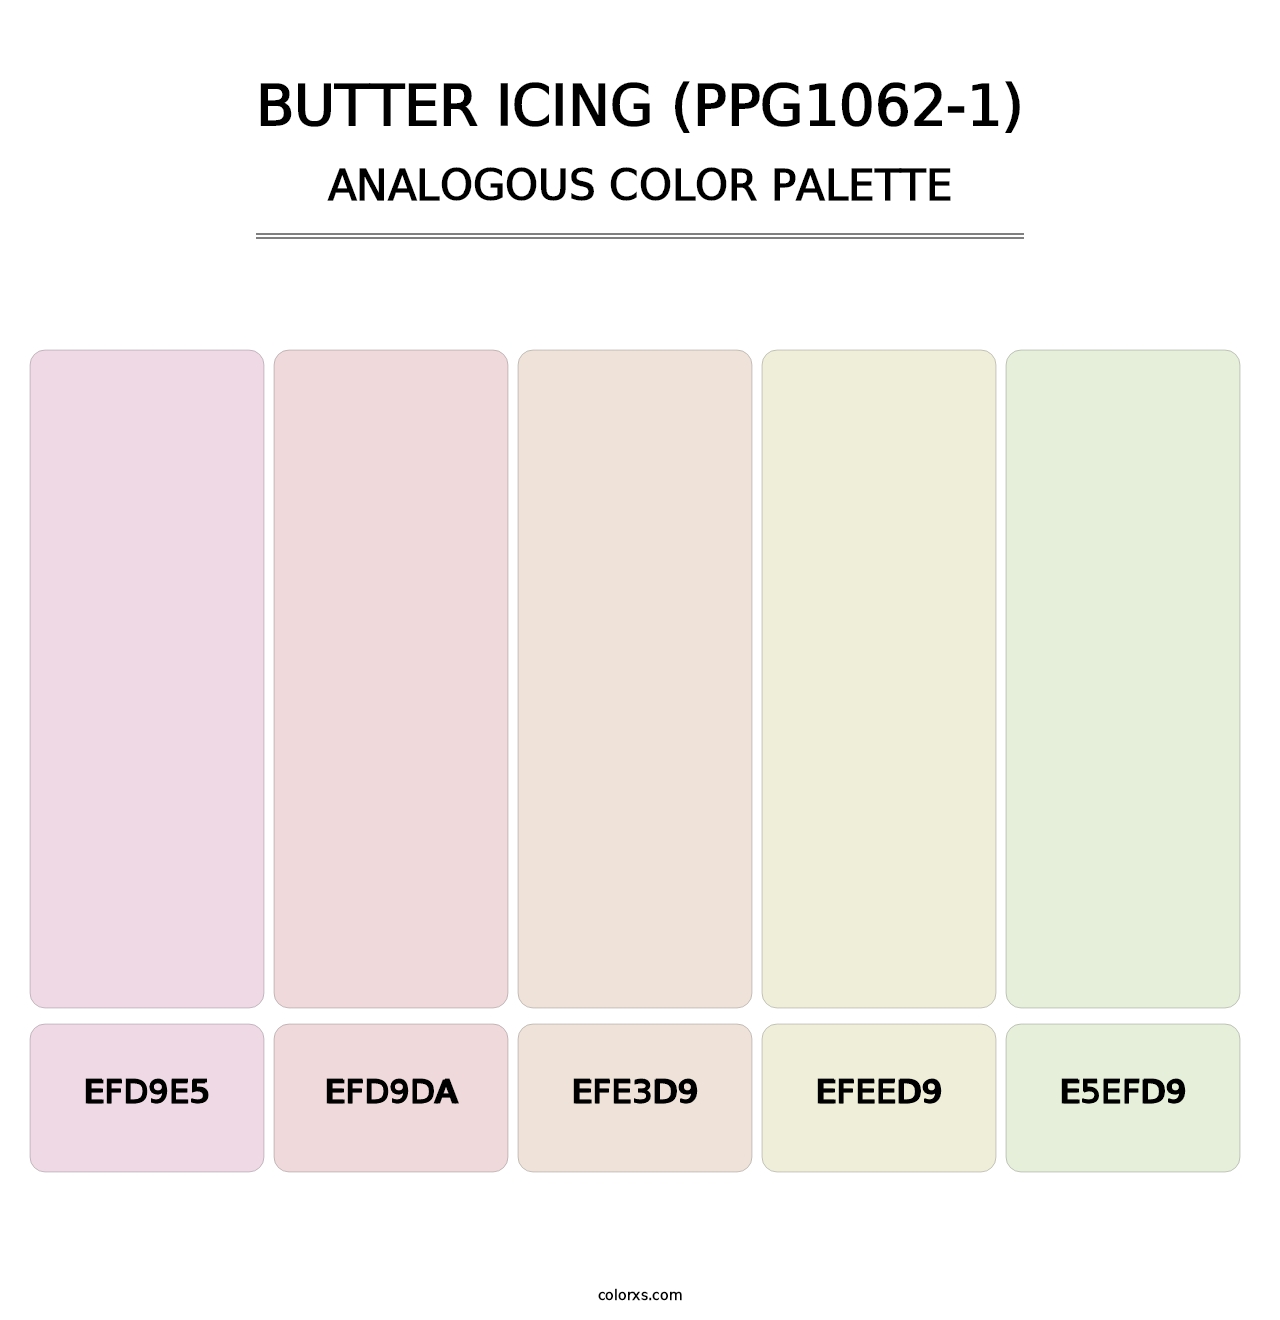 Butter Icing (PPG1062-1) - Analogous Color Palette